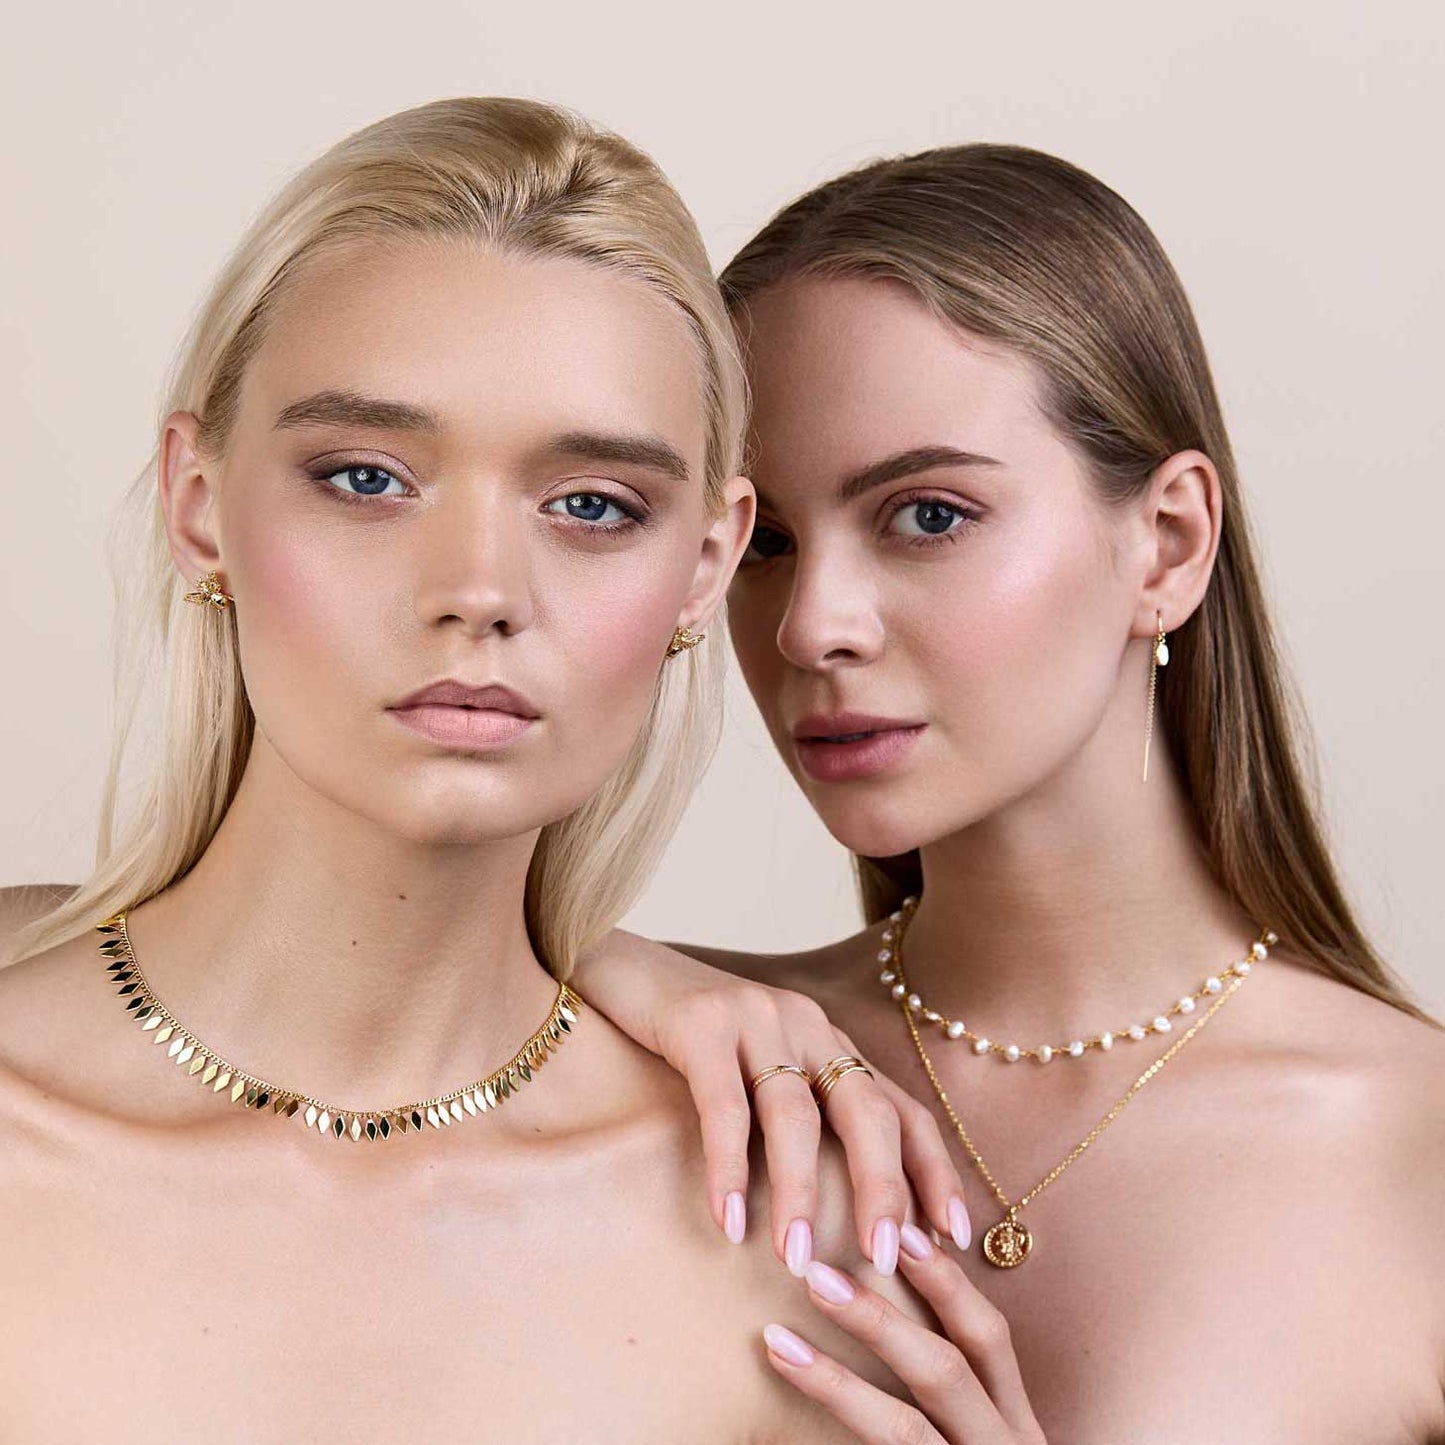 Two girls looking at the camera wearing earrings and necklaces